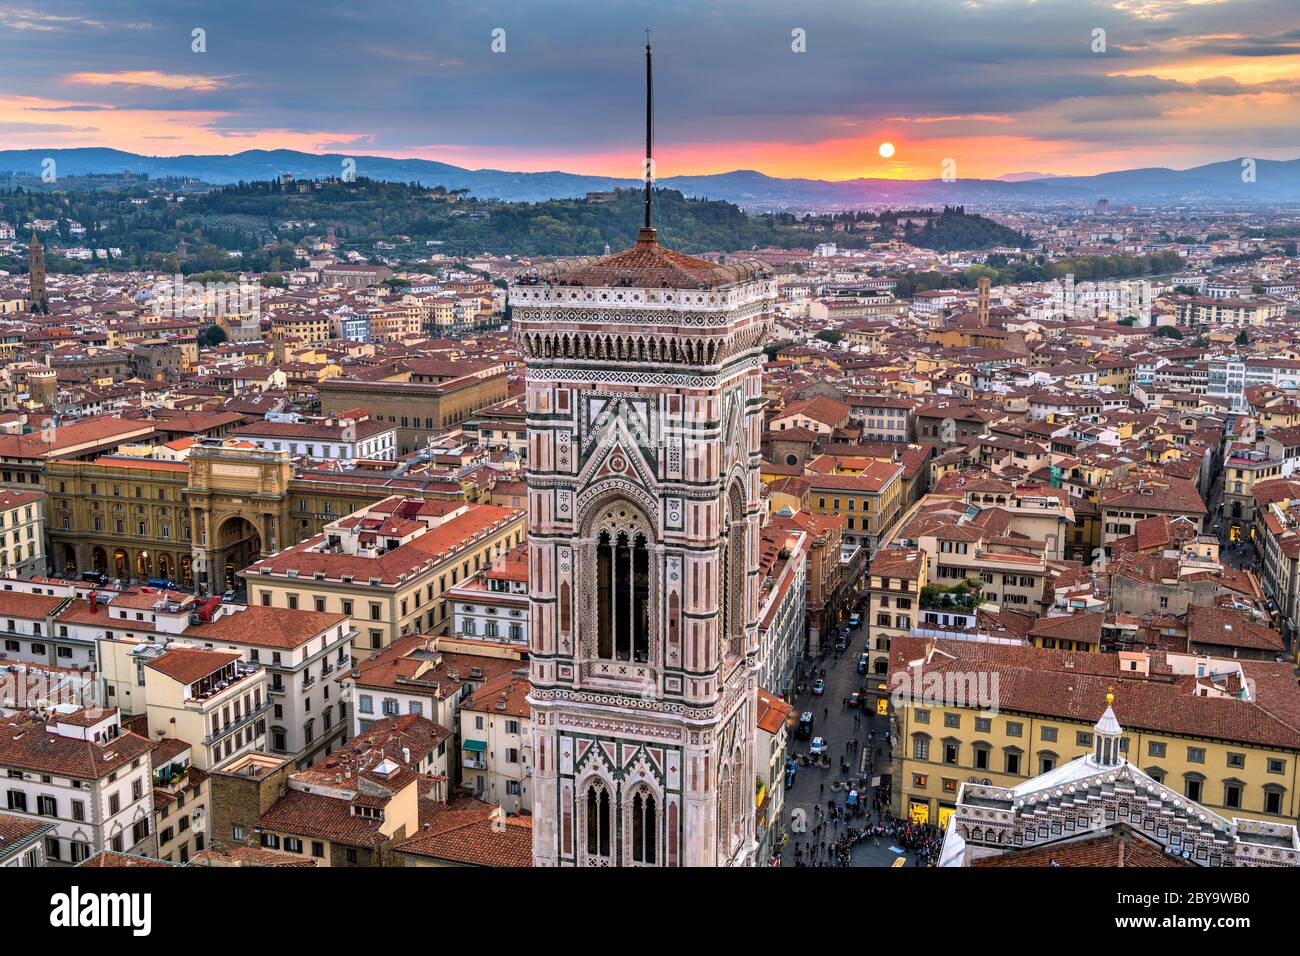 Sunset Giotto's Campanile - Aerial sunset view of Giotto's Campanile and Old Town of Florence, as seen from top of the dome of Florence Cathedral. Stock Photo